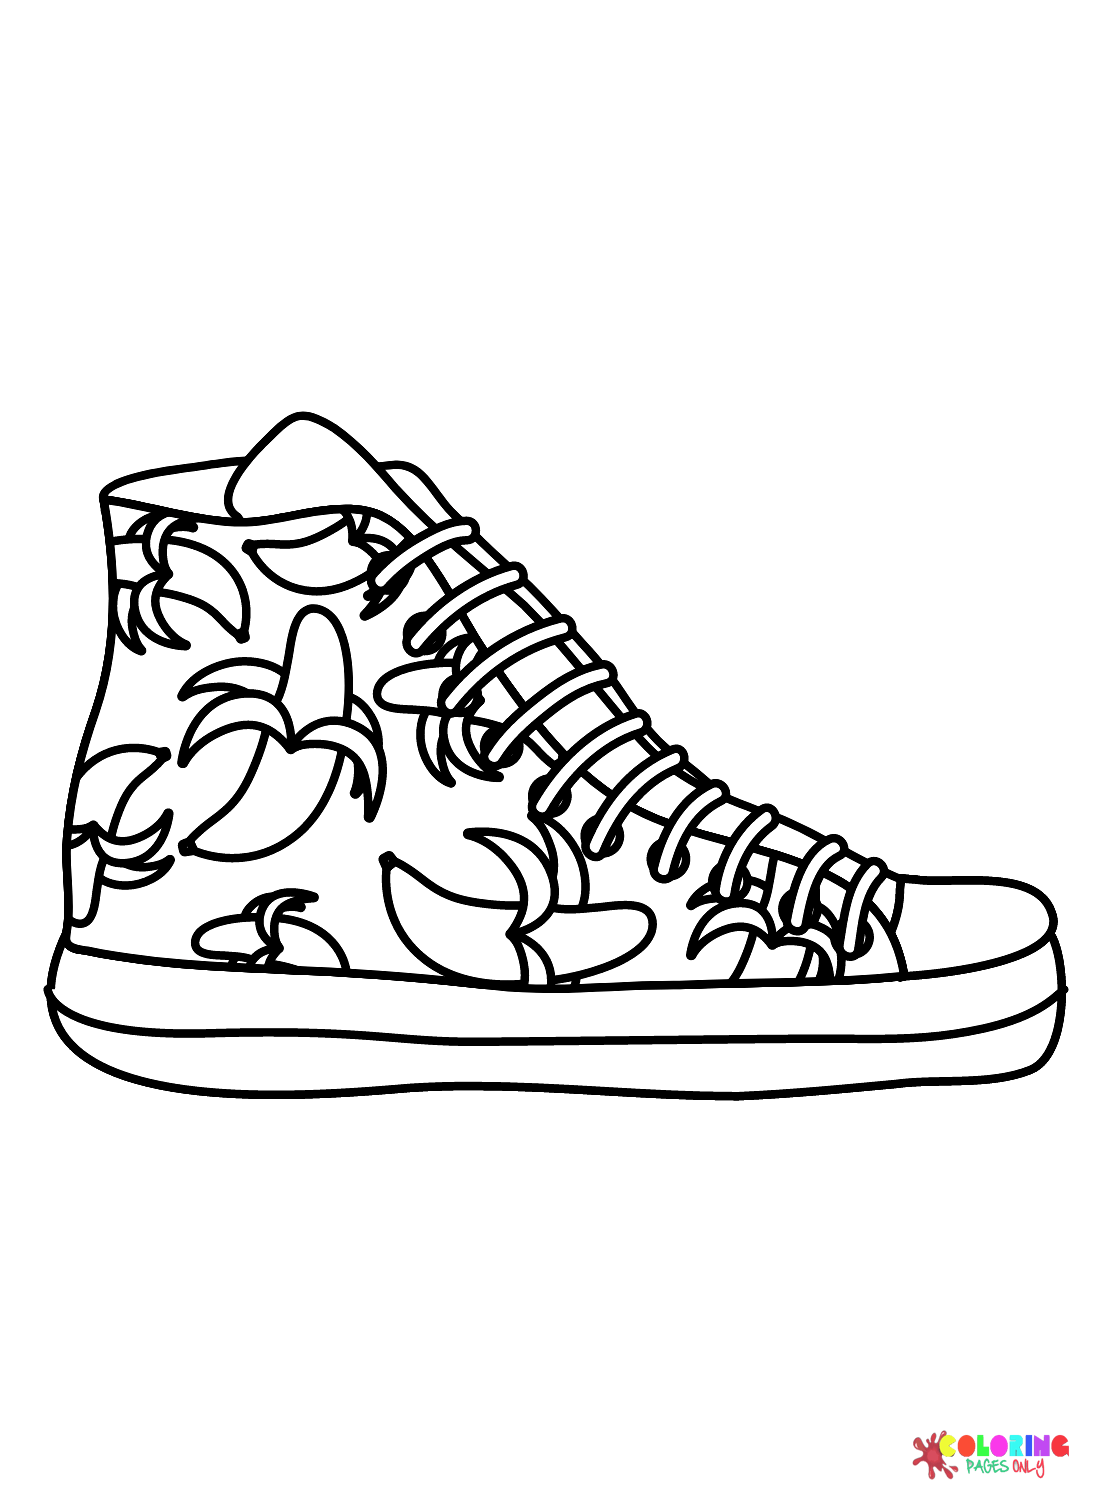 Sneaker with Bananas from Sneaker